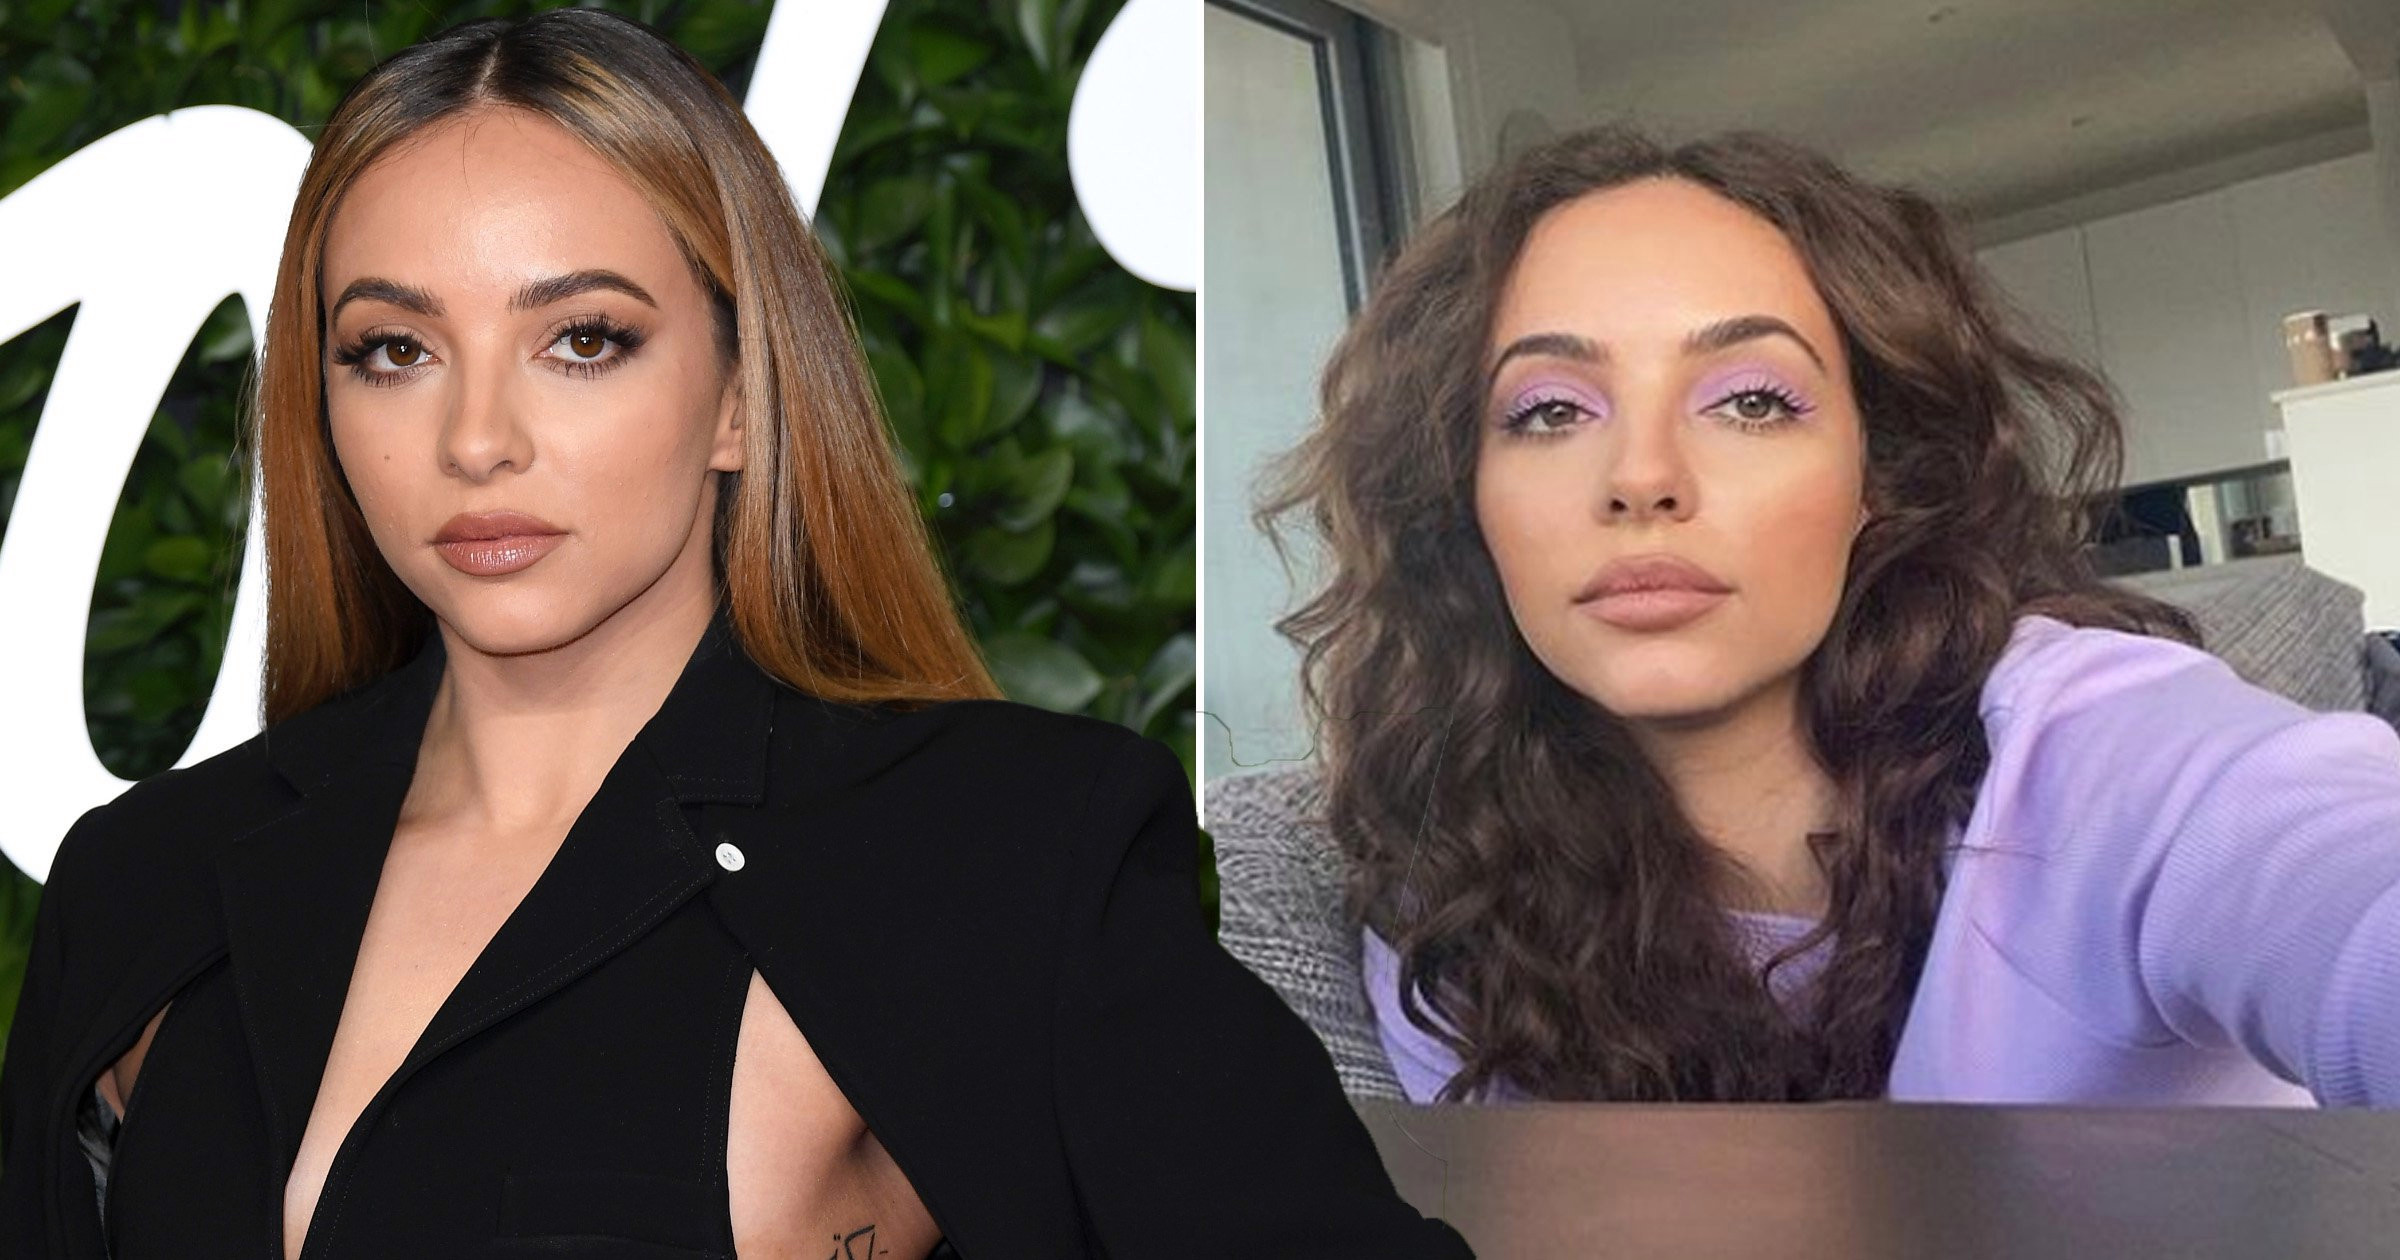 Little Mix star Jade Thirlwall expertly sums up the perils of Zoom calls in lockdown